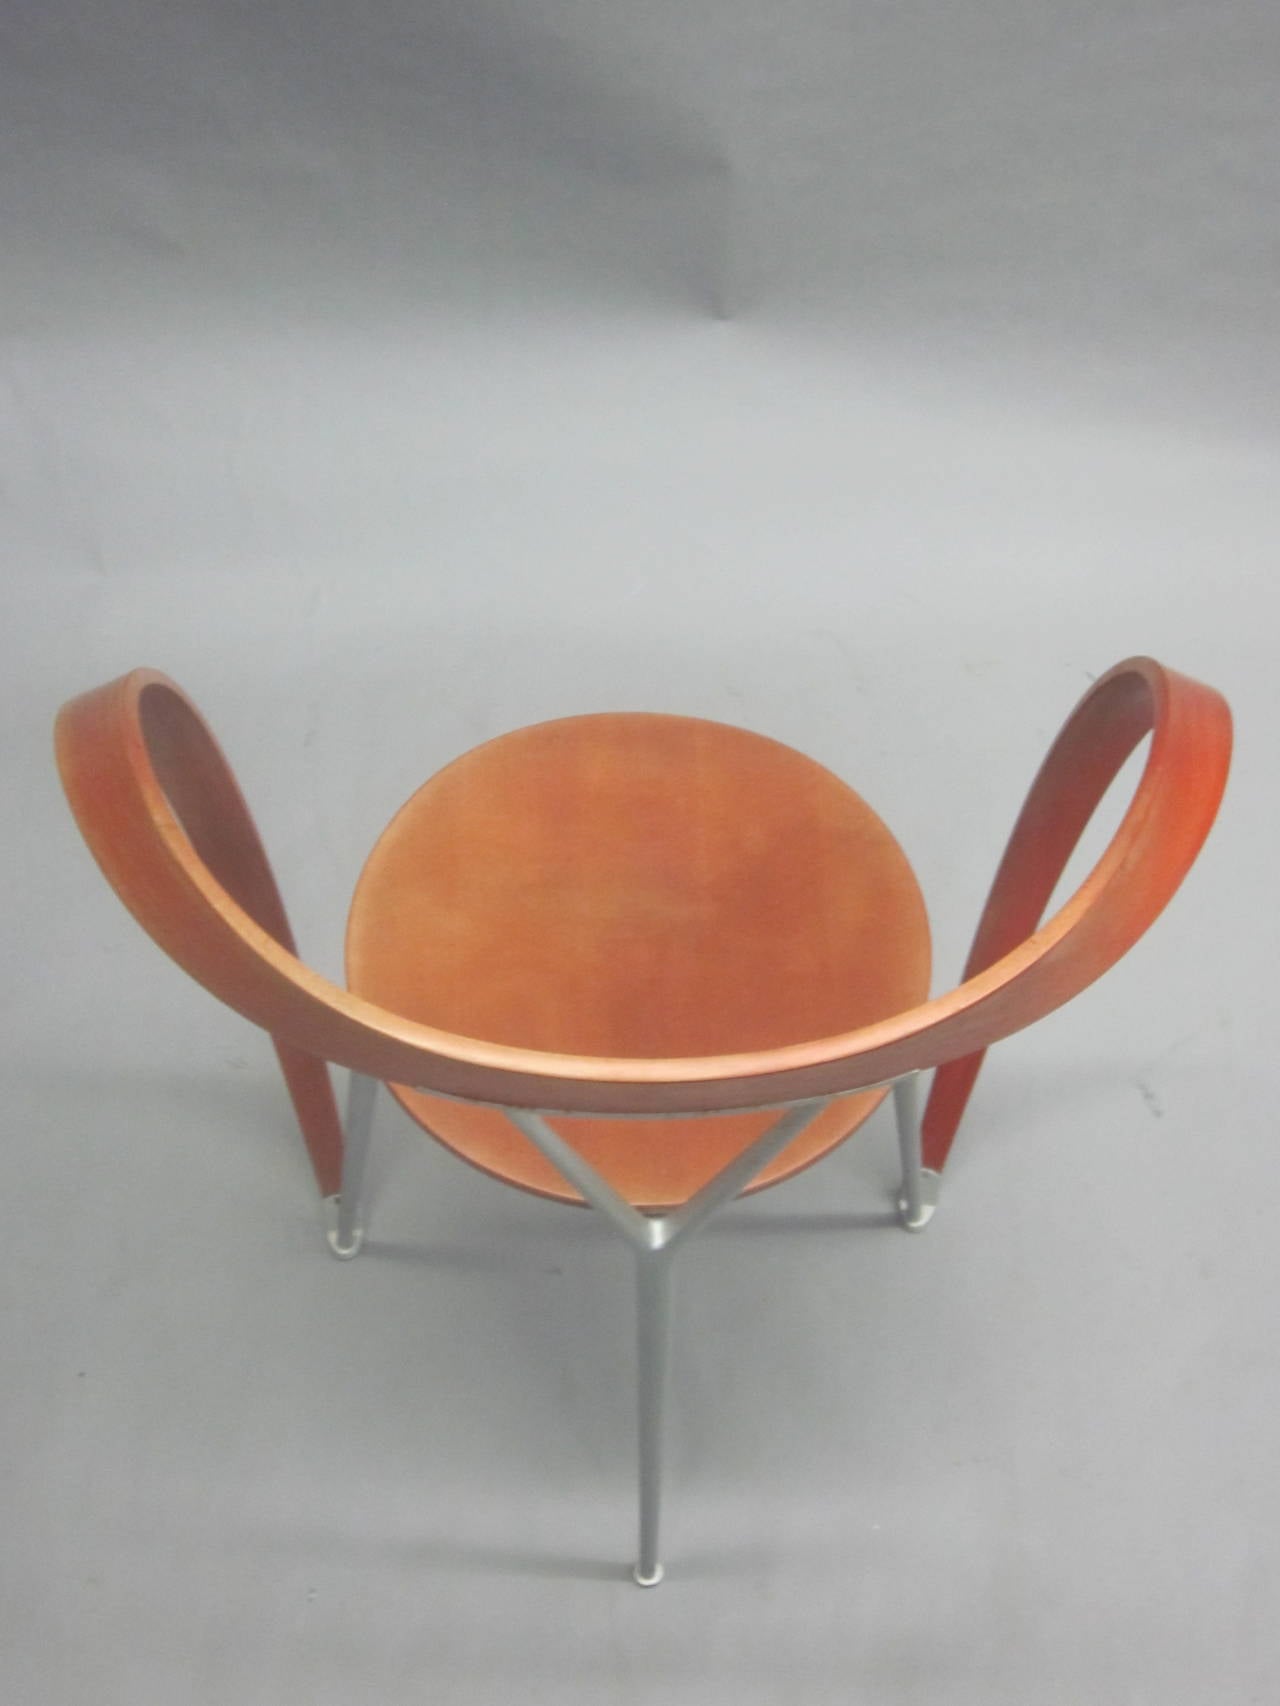 Italian Design / Mid-Century Style Modern Lounge Chair by Andrea Branzi, 1993 For Sale 2